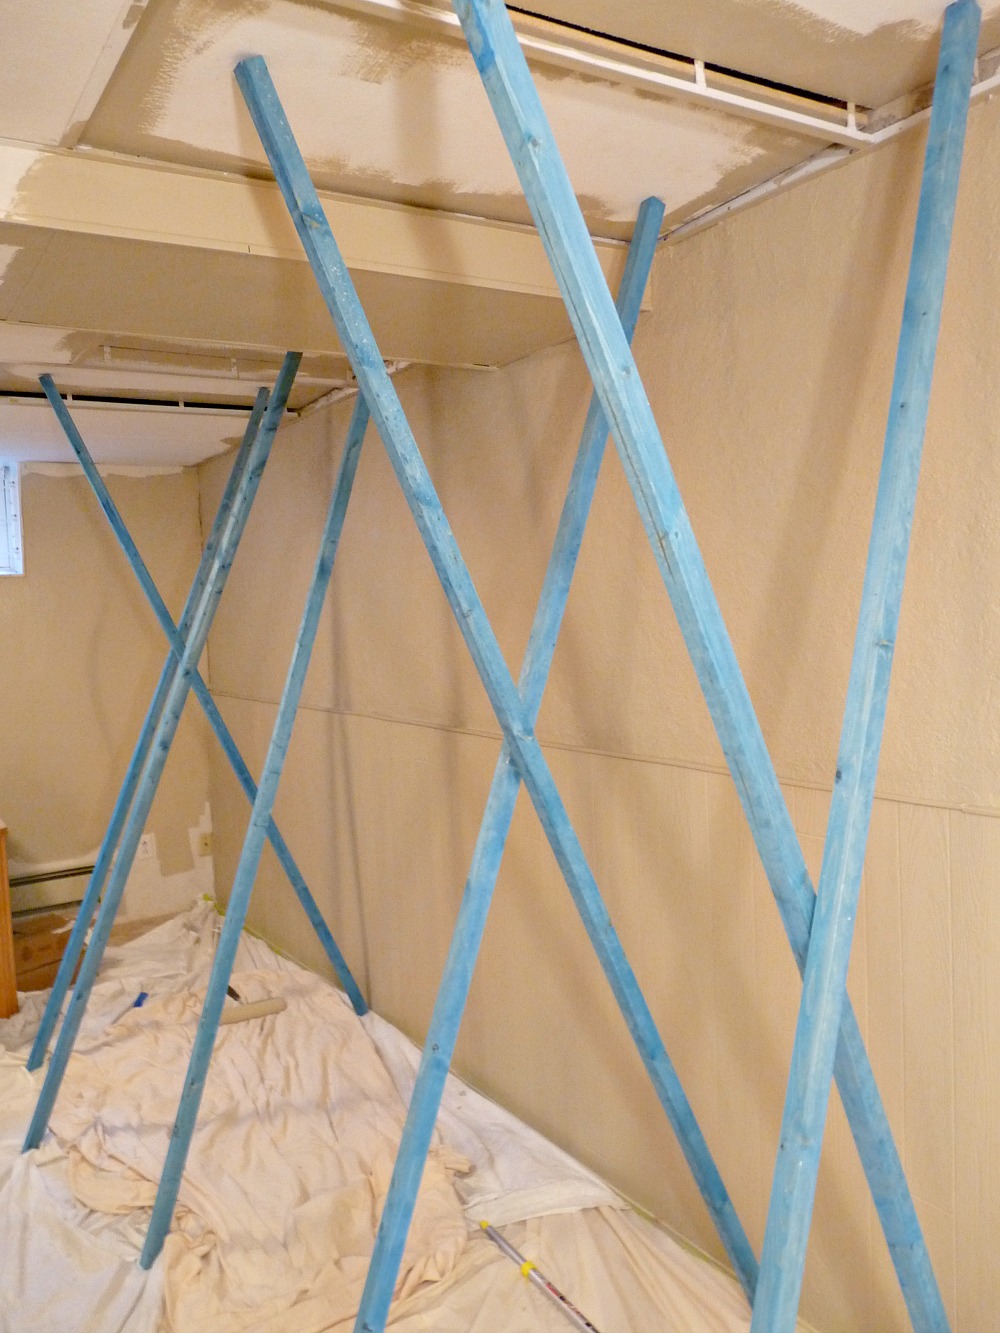 Basement Update How To Paint Drop Ceilings You Cannot Remove